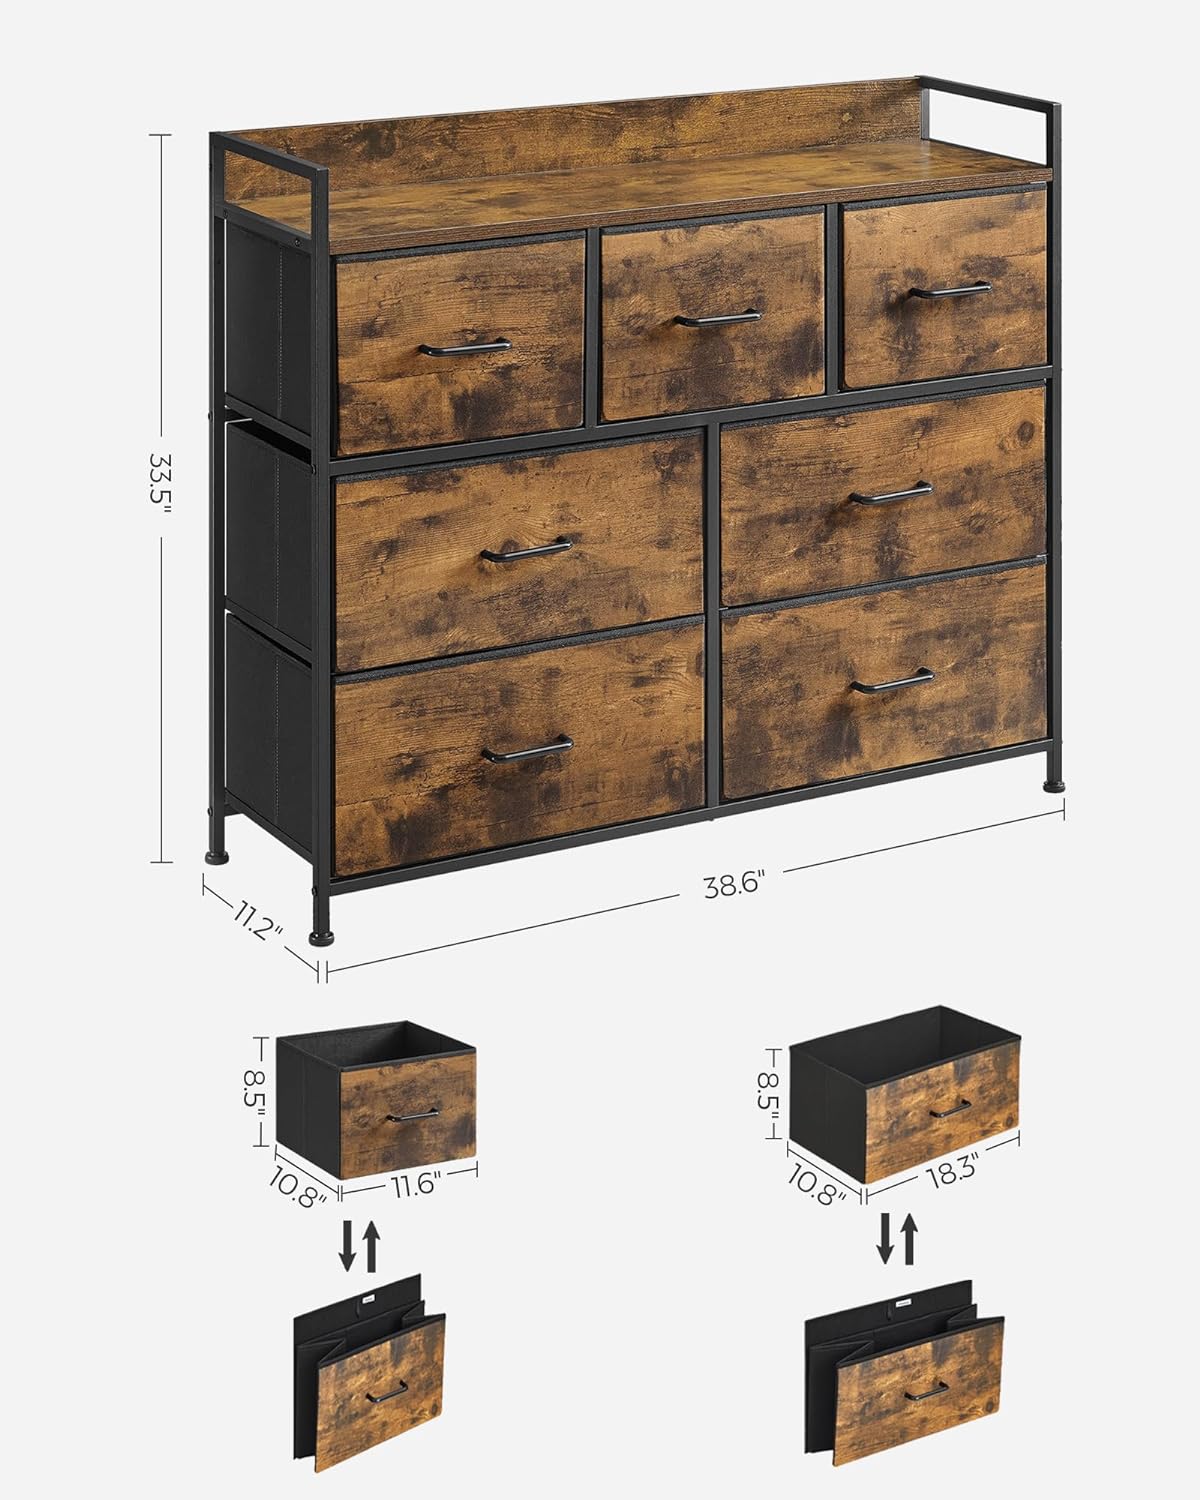 SONGMICS Dresser for Bedroom Chest of Drawers Rustic Brown and Black